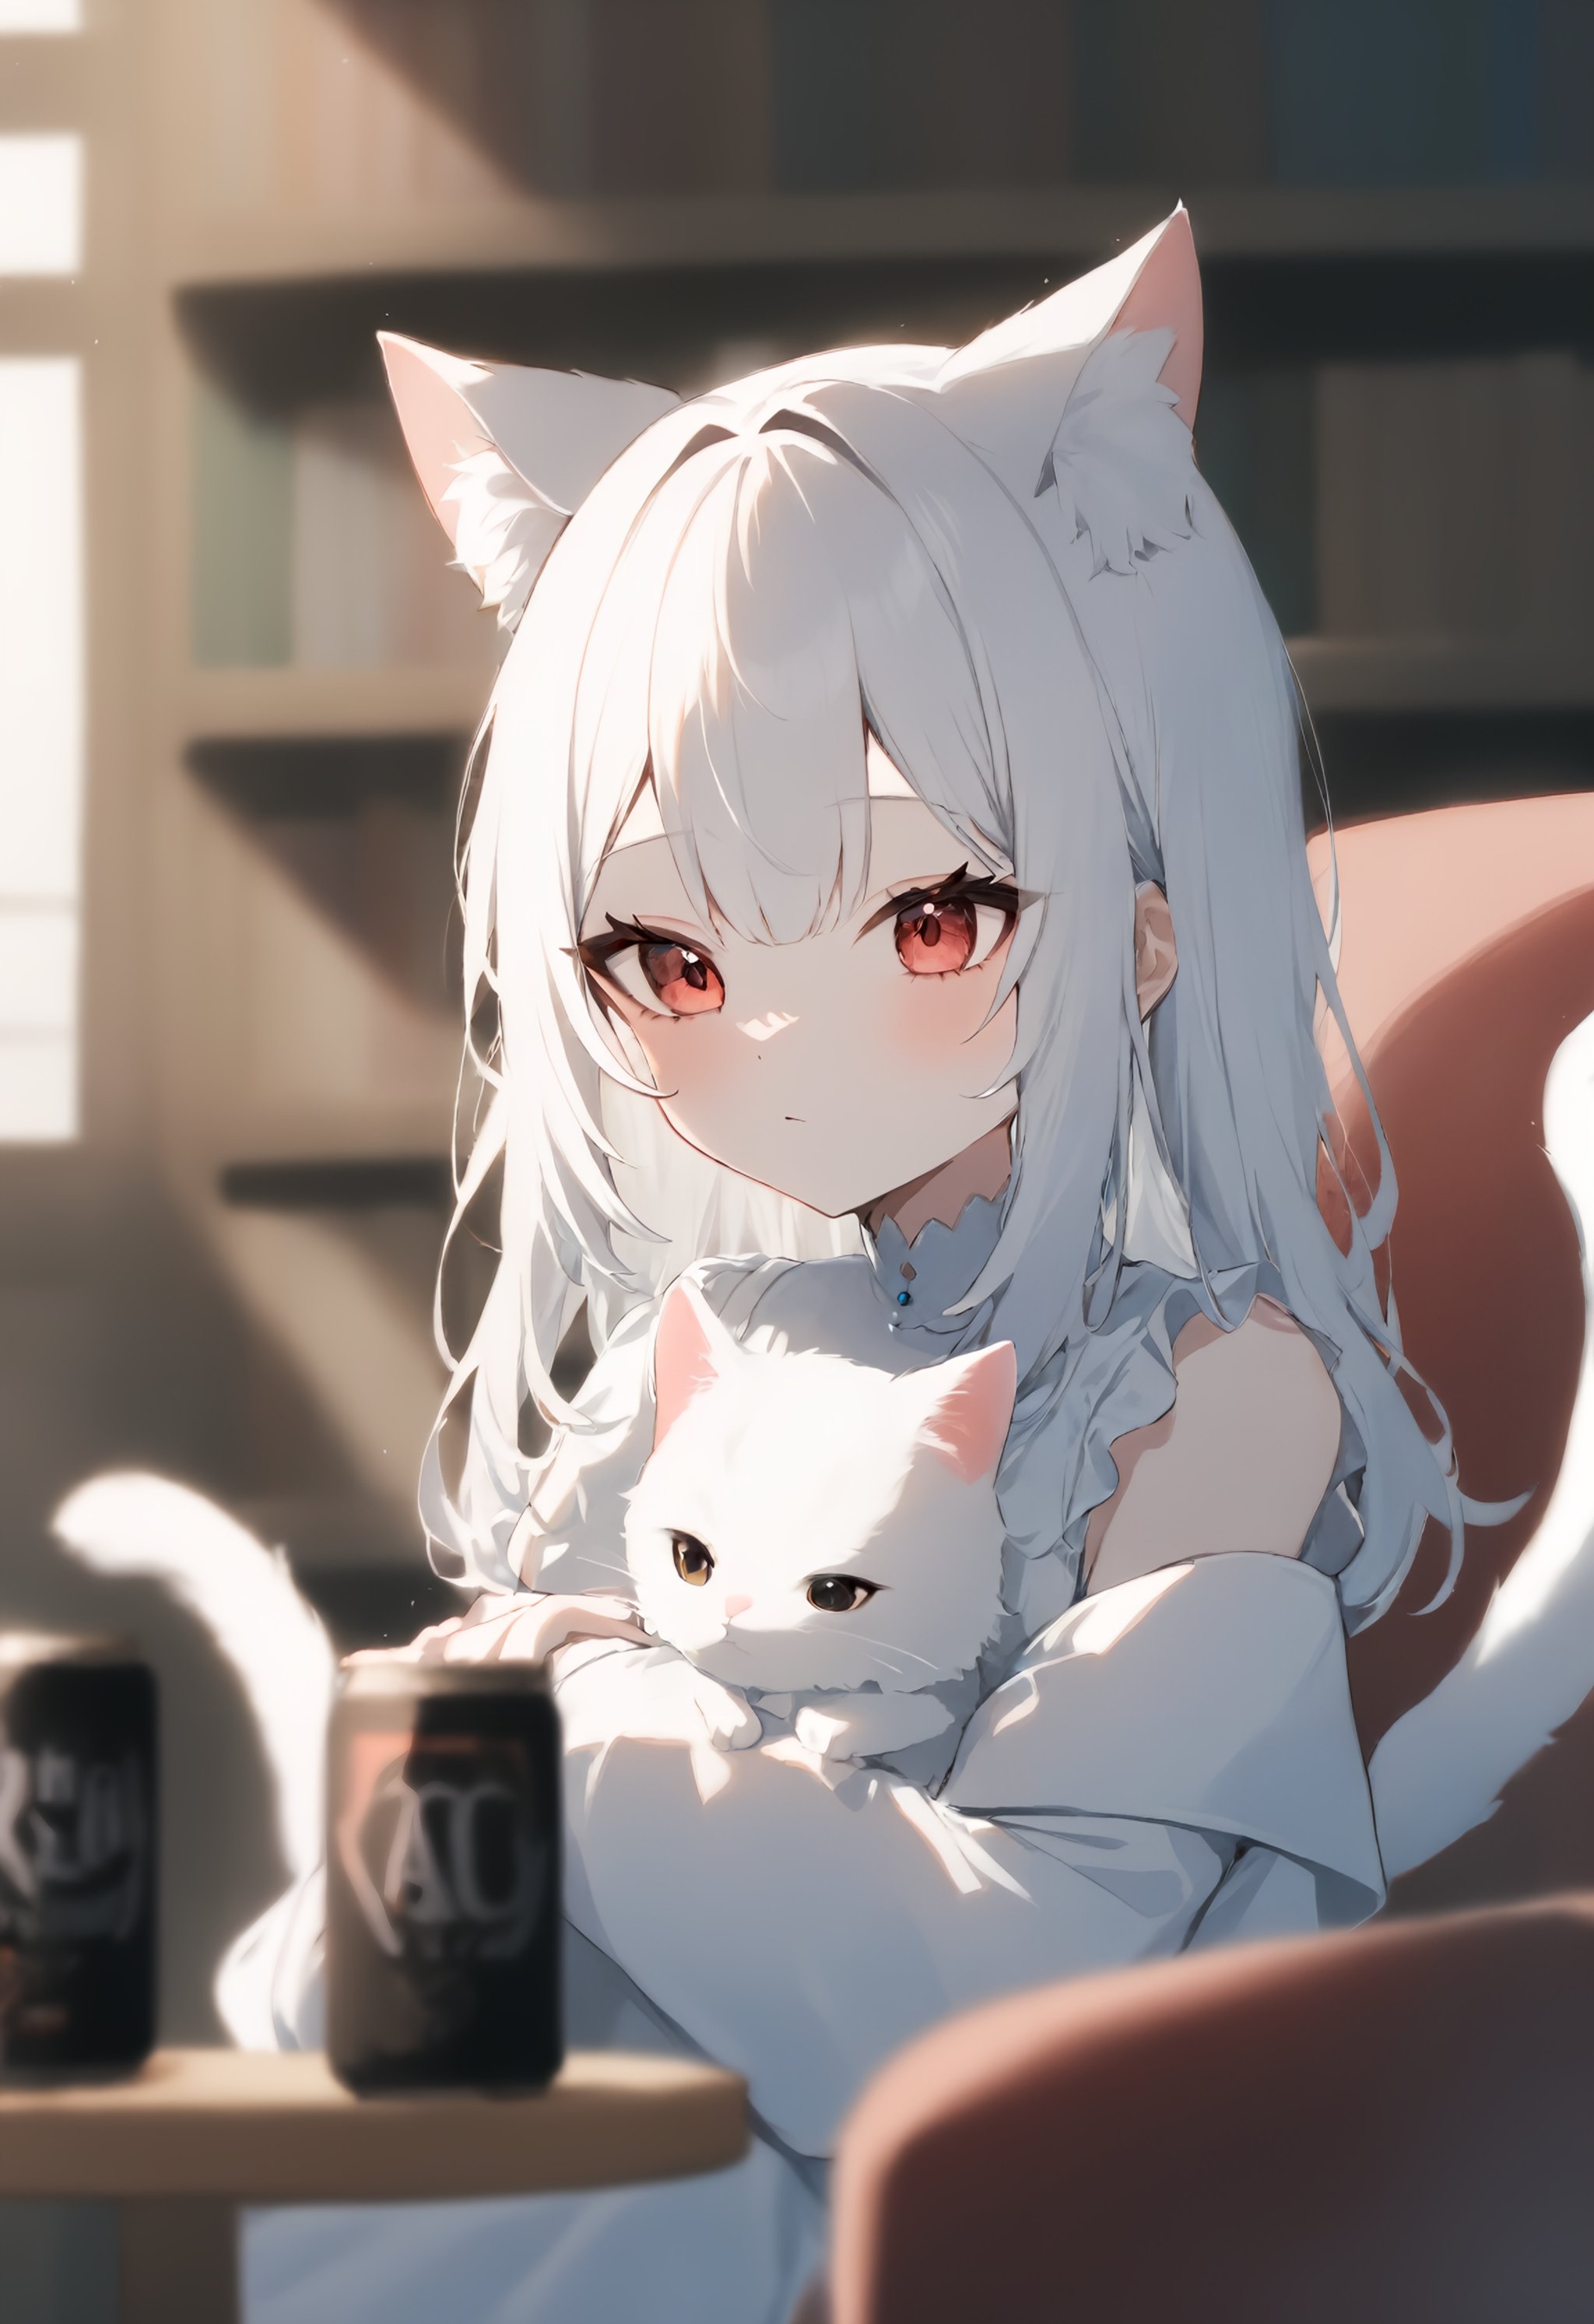 1girl, solo,a young girl with white hair and wearing a white dress sits on a couch, embracing a white cat, She has cat ears and a tail, showing her to be a feline creature like human, with a window letting in natural light and a bookshelf full of various books, Nearby, one can see a cup placed on a table, depth of field, blurry foreground, blurry background,masterpiece, best quality, absurdres, recent, newest, safe, sensitive